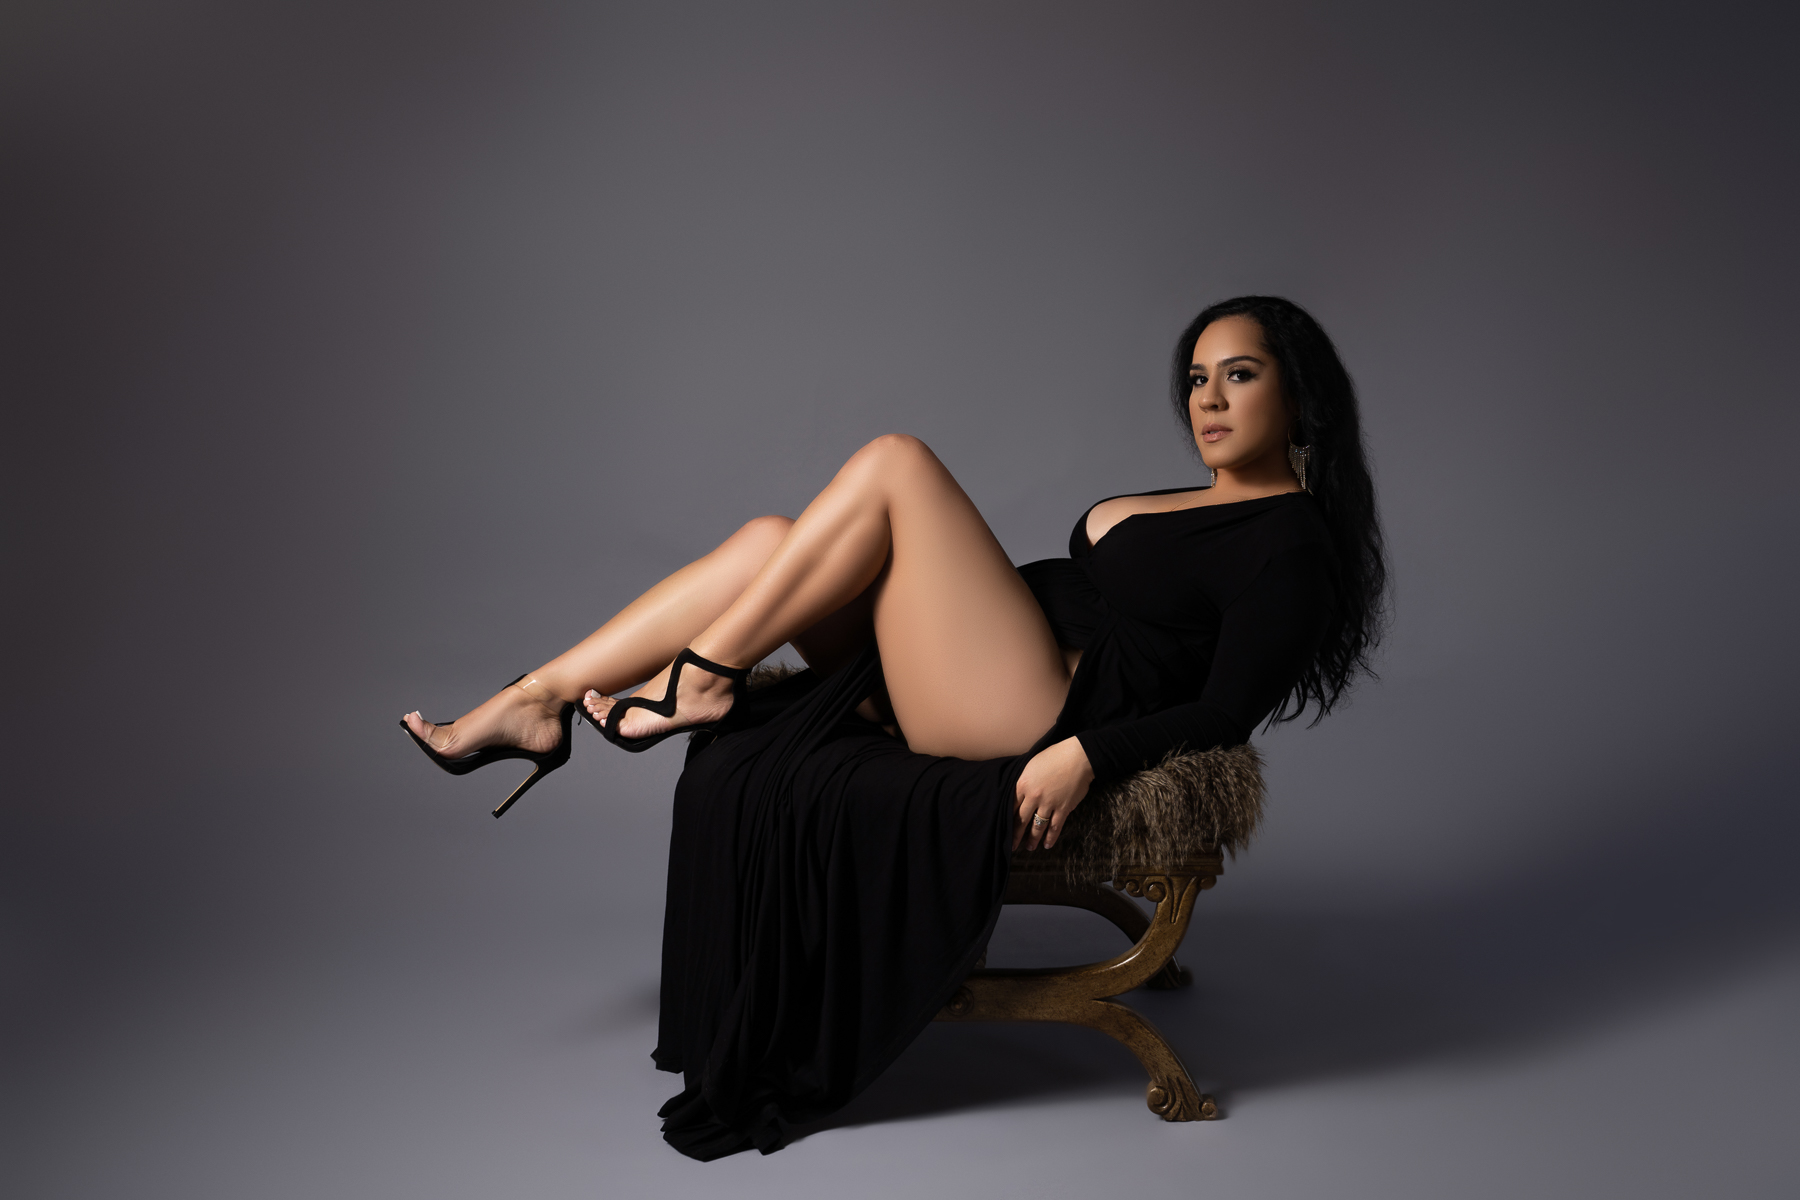 Glamour Photoshoot, woman in sexy black dress